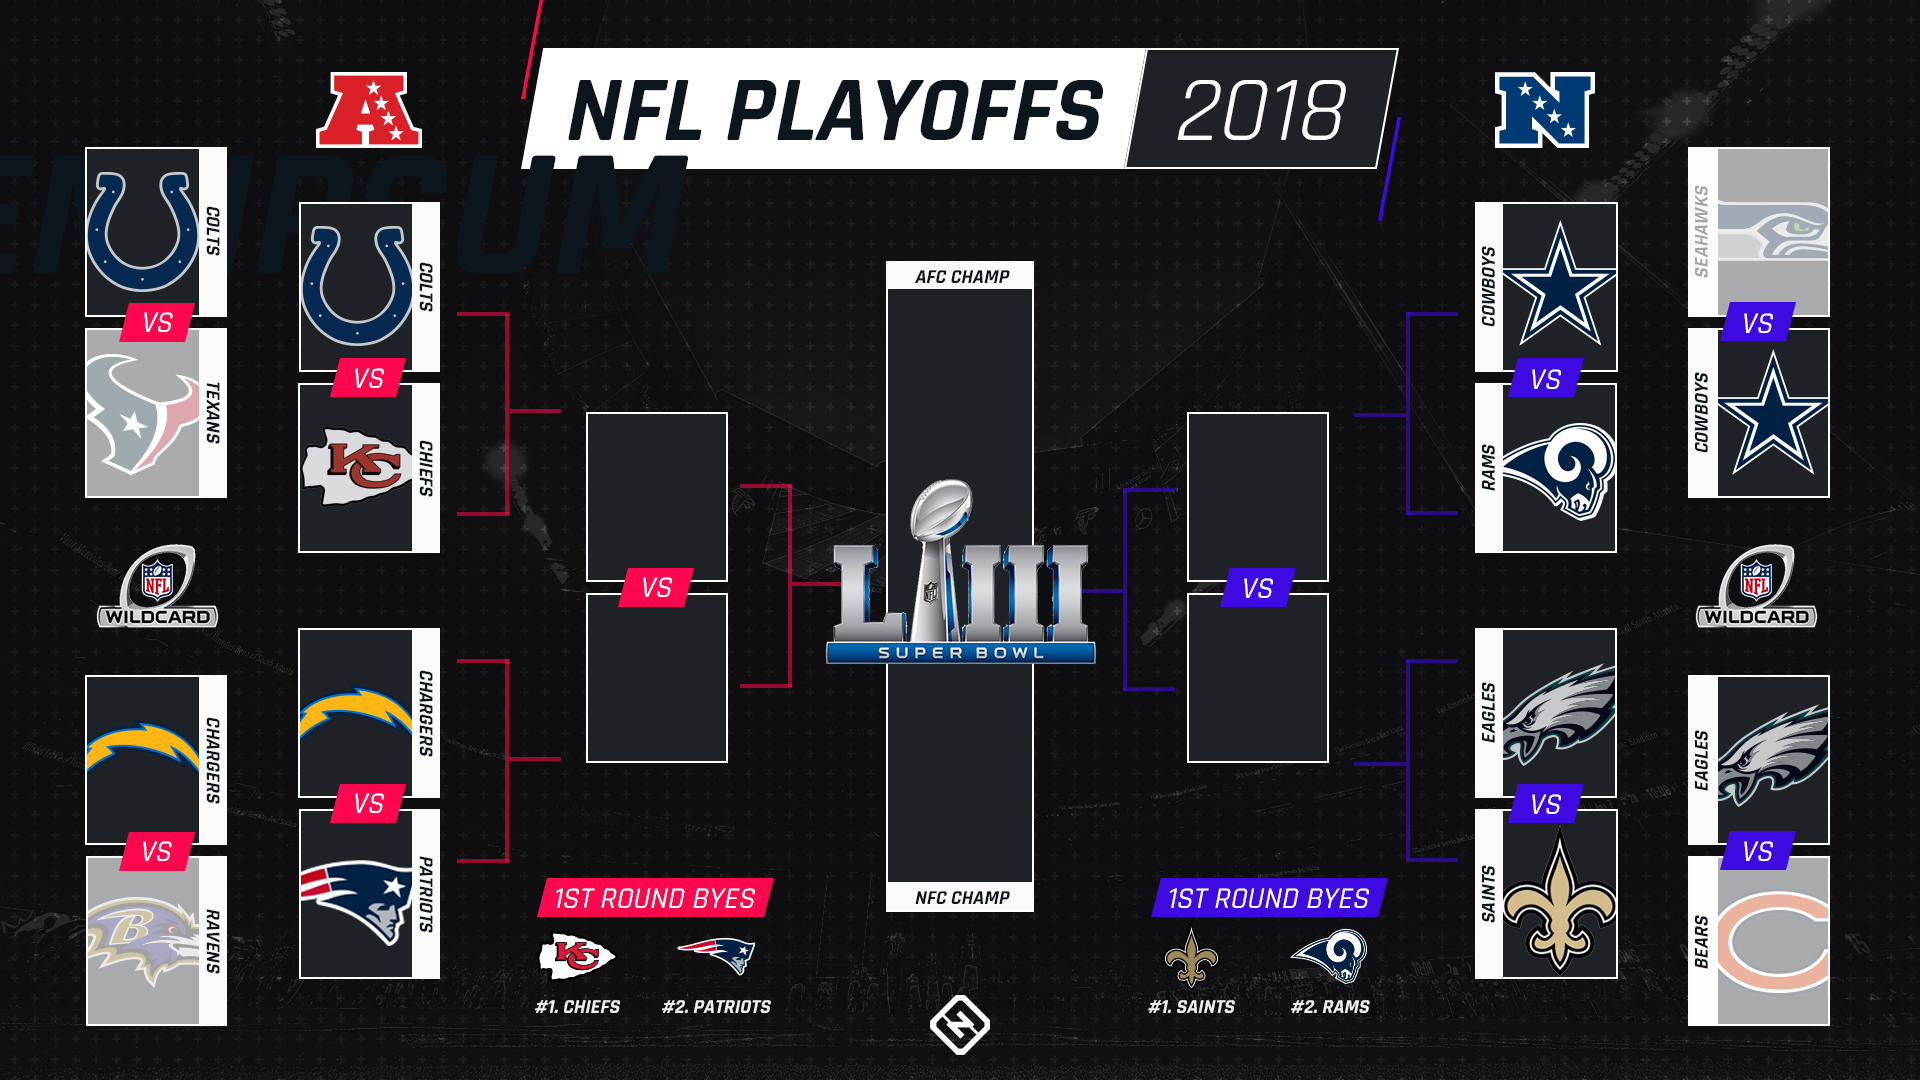 NFL playoff schedule: Kickoff times, TV channels for divisional round